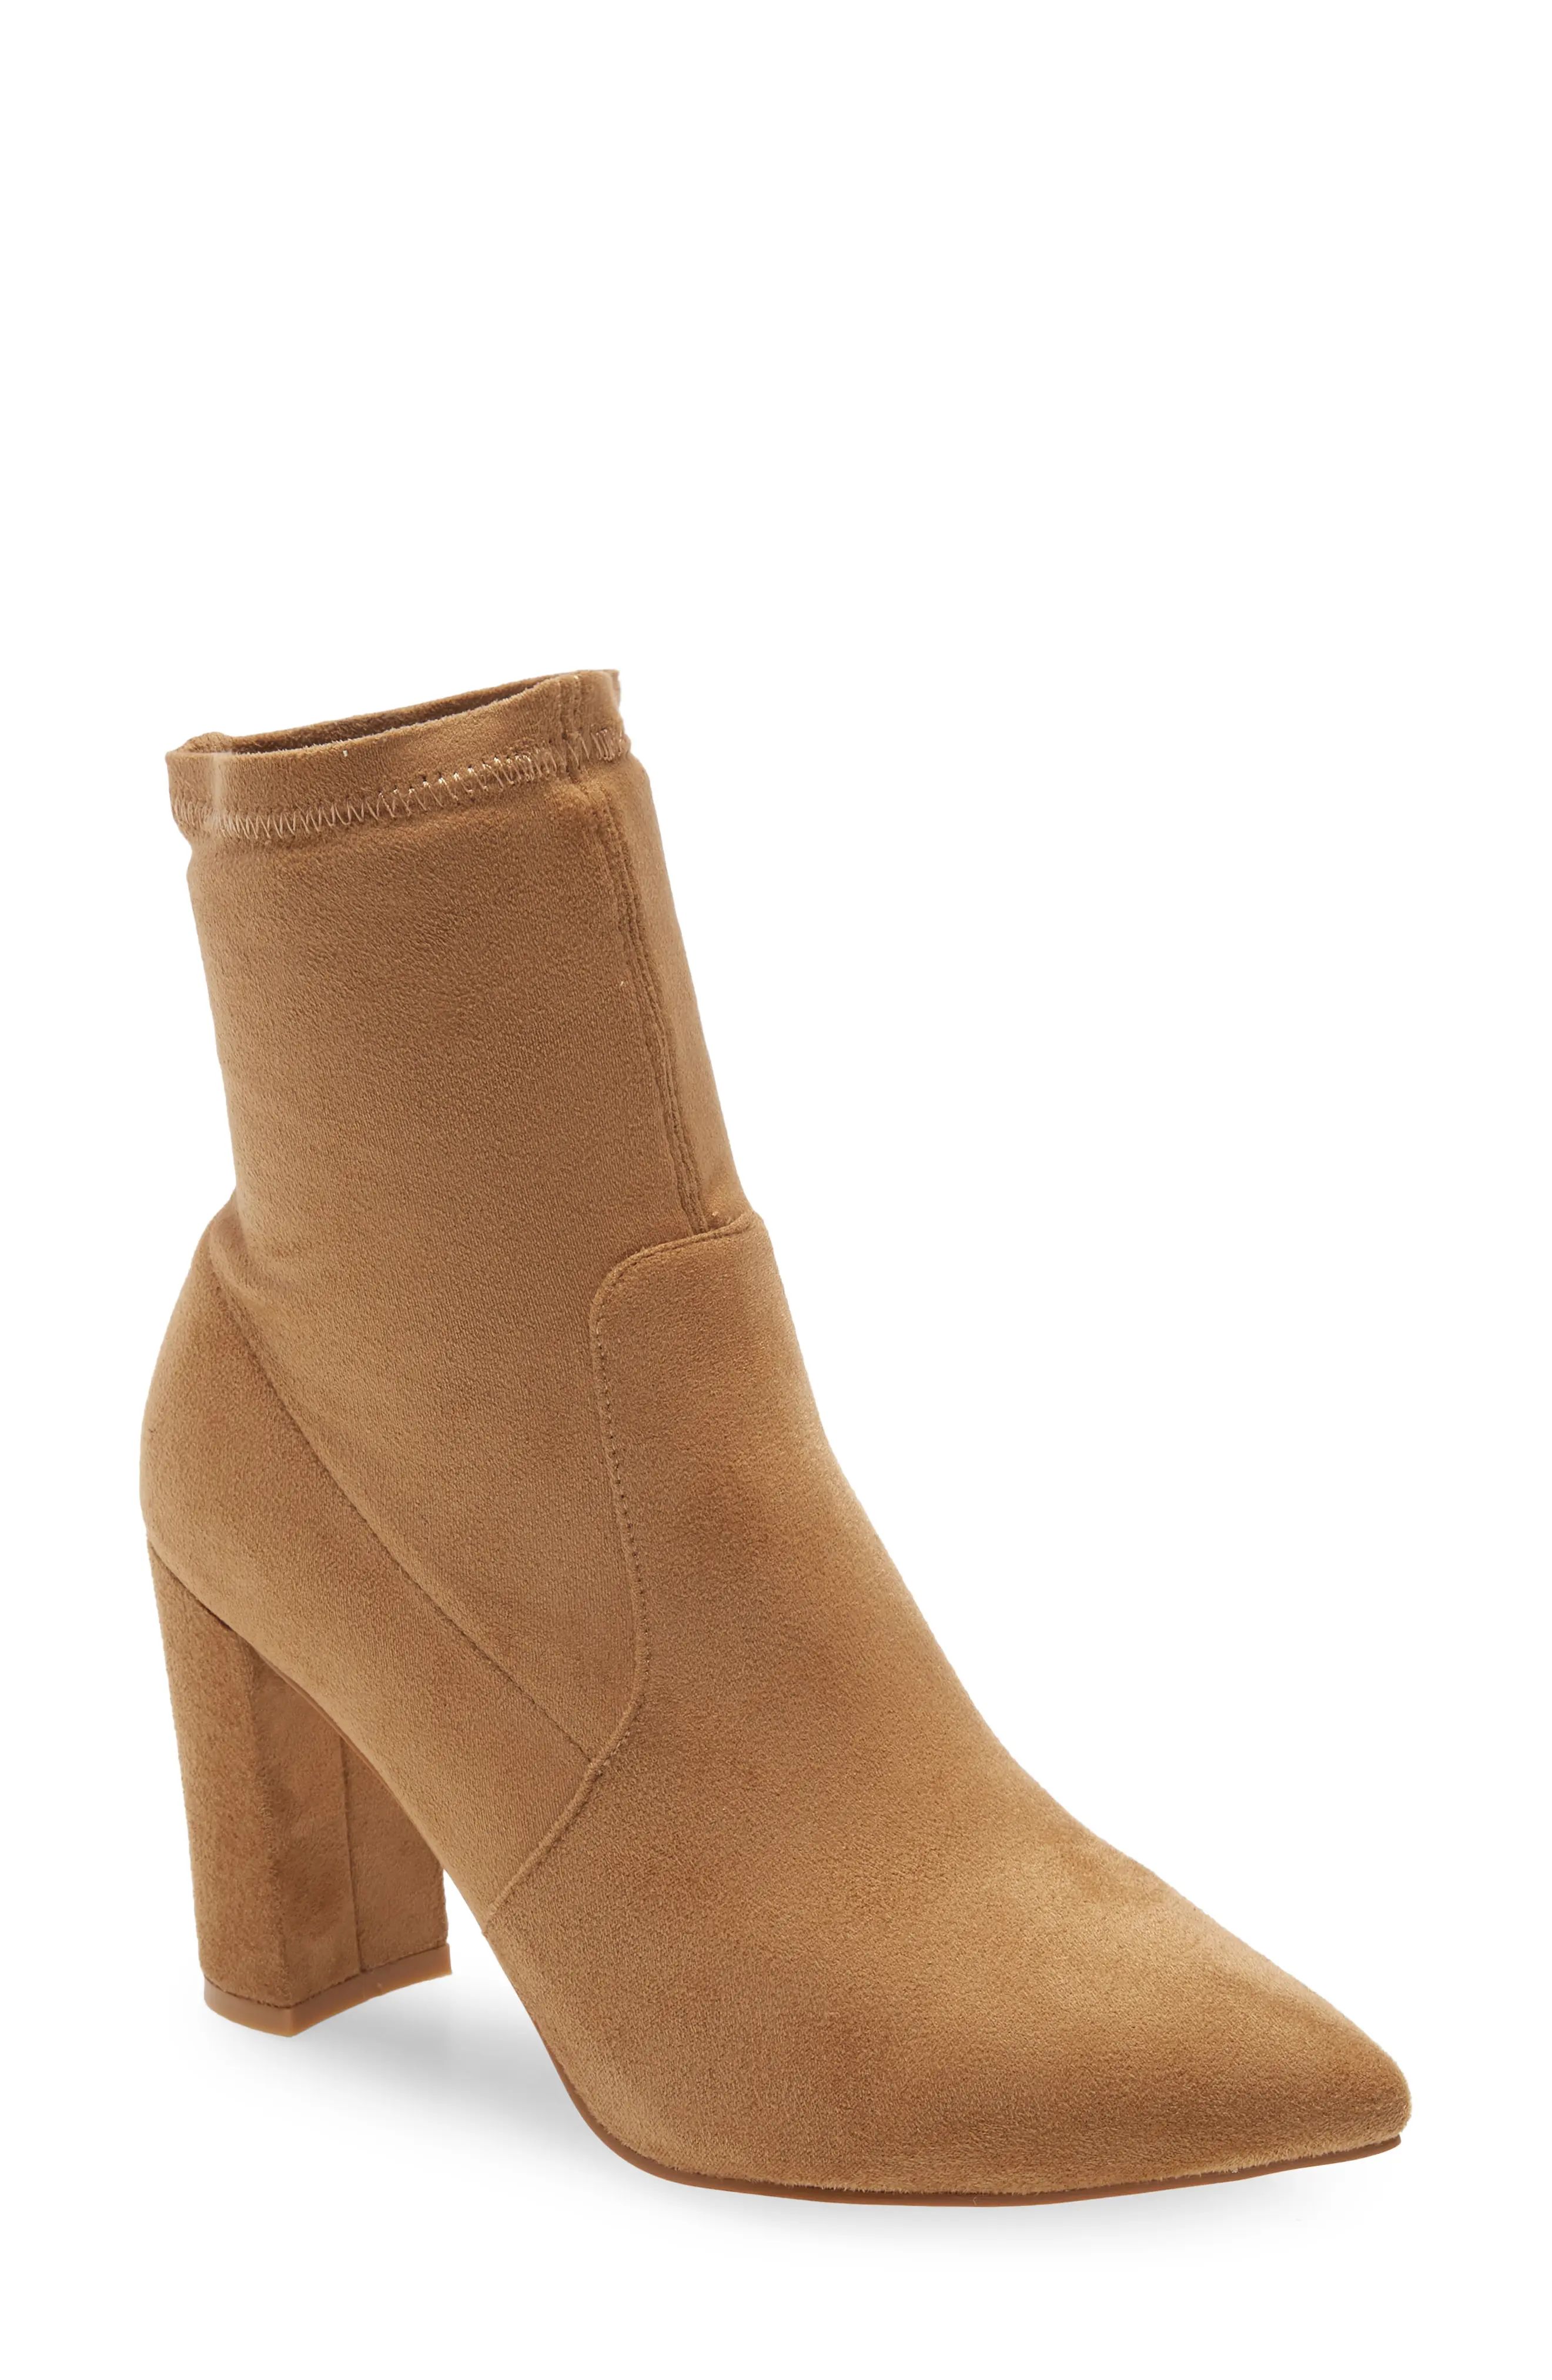 Billini Waverly Faux Suede Bootie in Toffee Suede at Nordstrom, Size 5 | Nordstrom